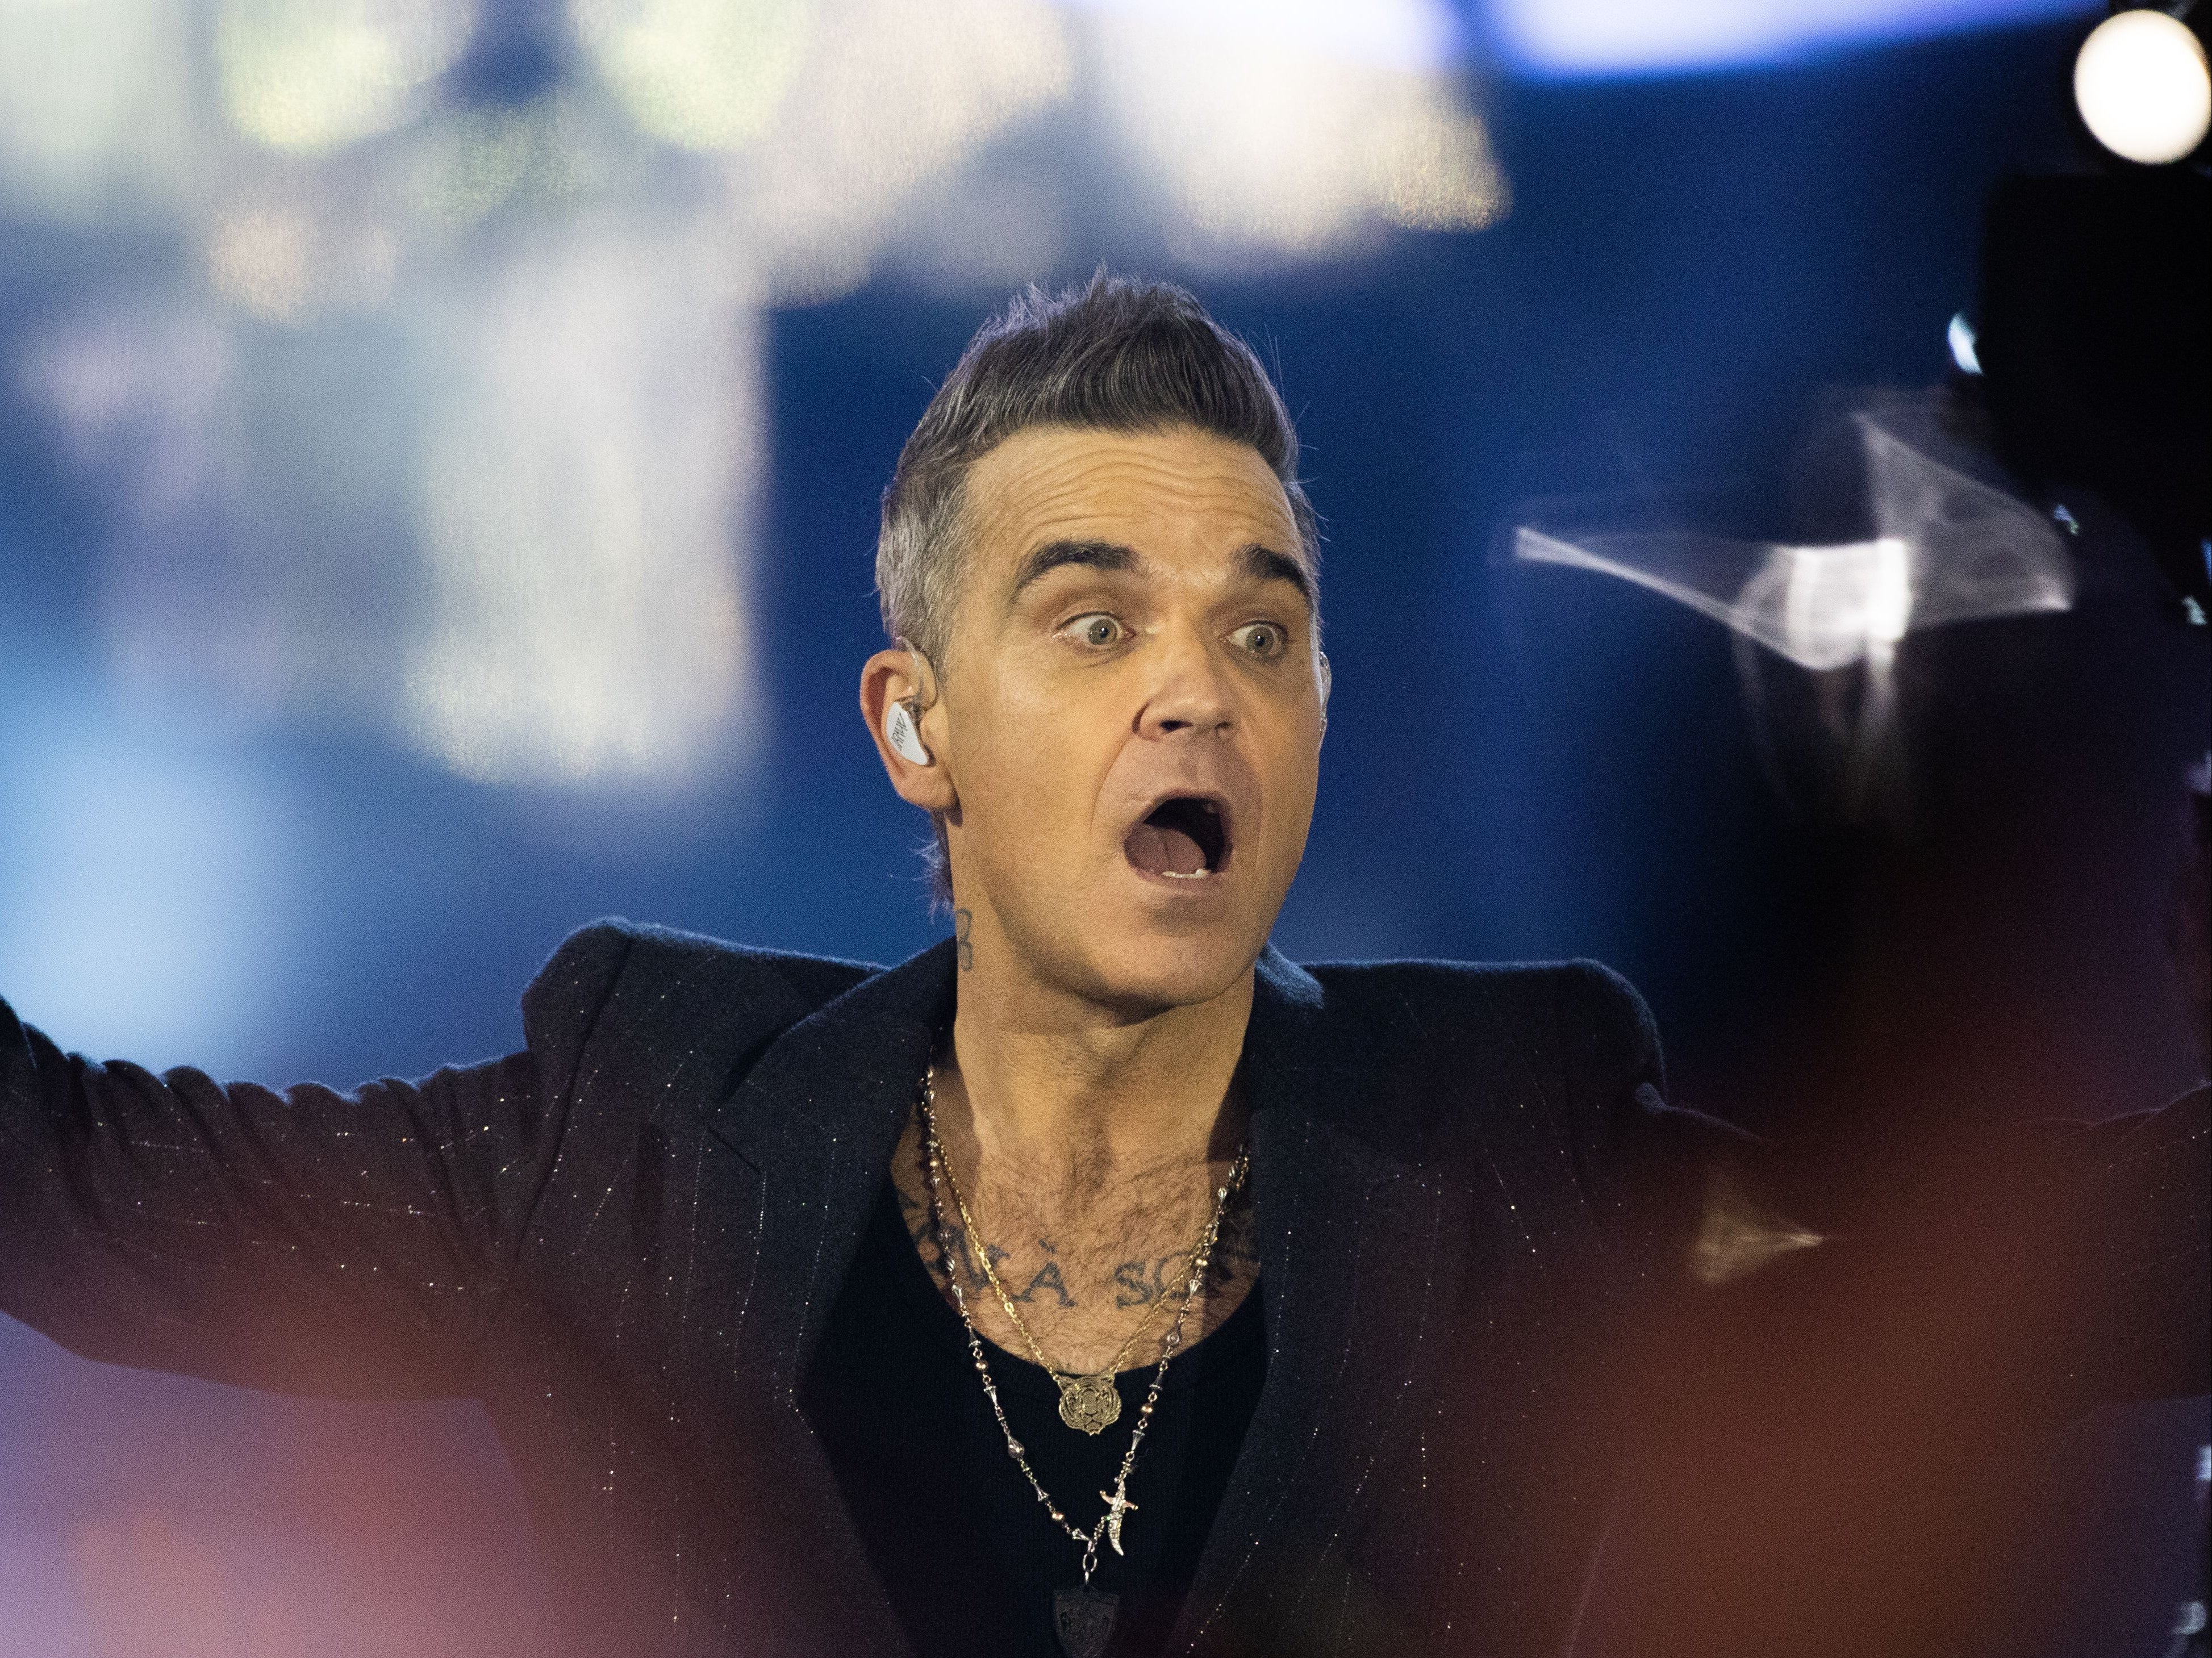 robbie williams recalls the shoplifting joke that almost got him ‘cancelled’